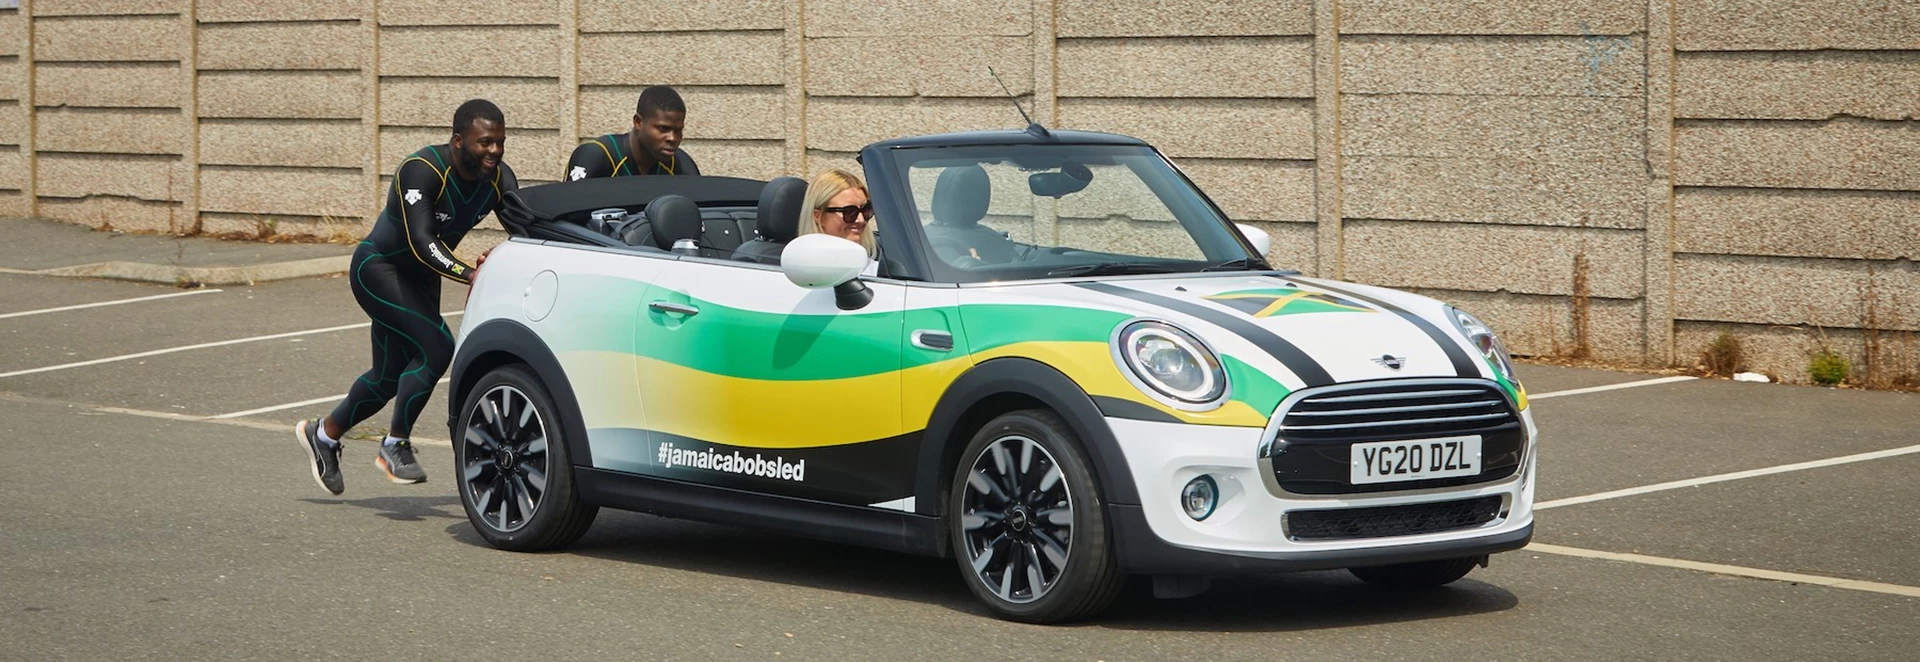 Jamaican bobsleigh team replace sled with a Mini Convertible during lockdown 